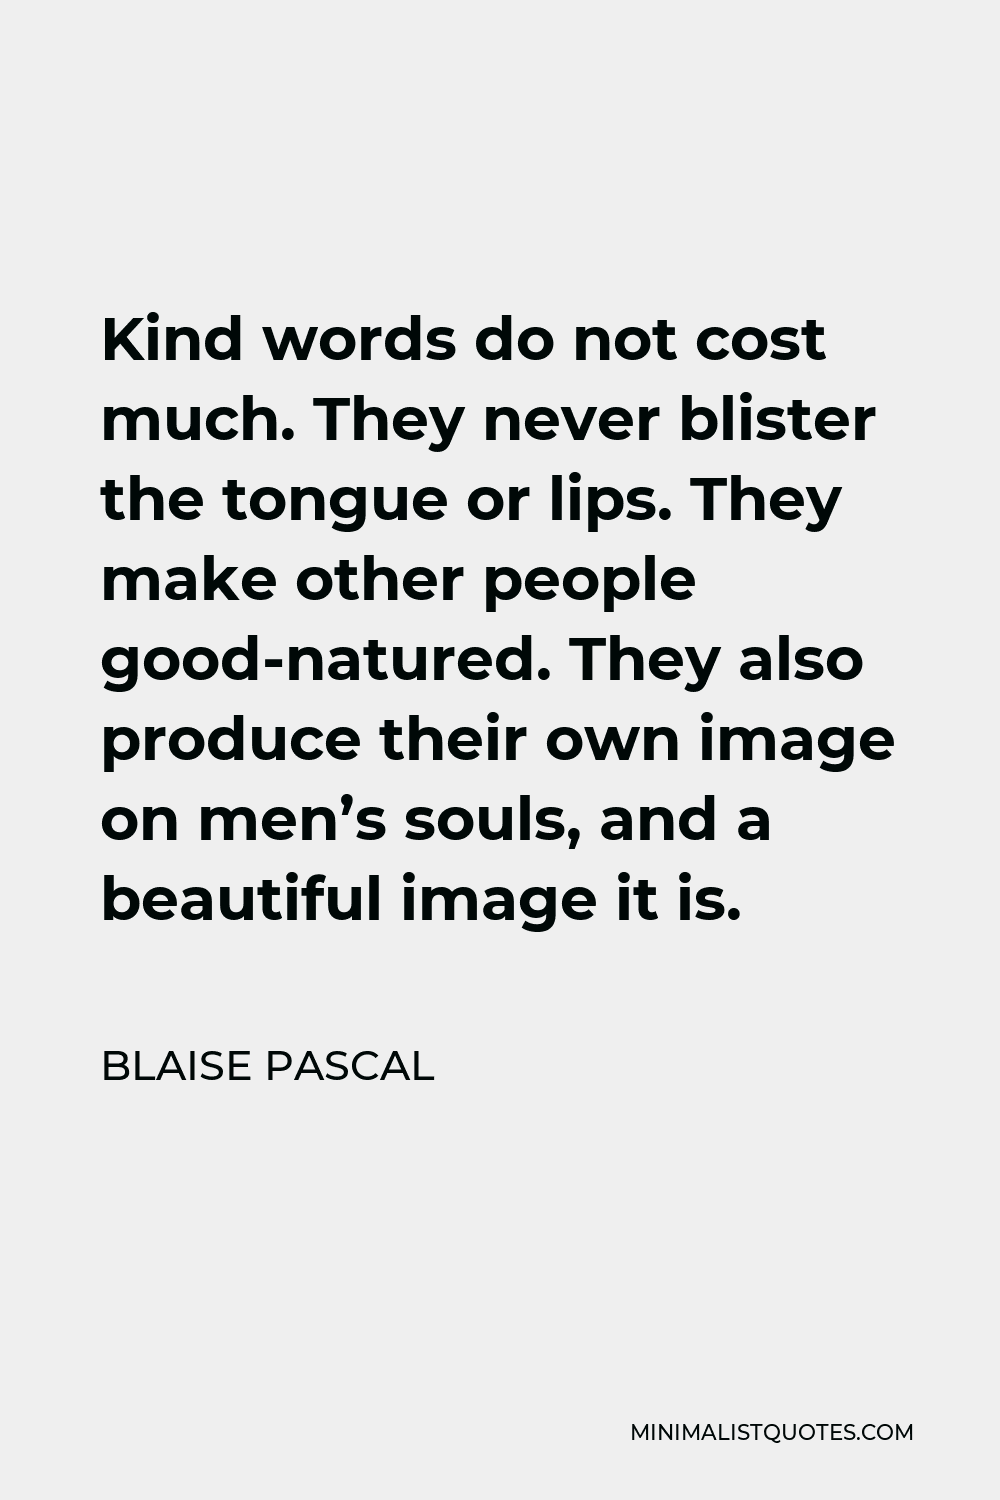 Blaise Pascal Quote - Kind words do not cost much. They never blister the tongue or lips. They make other people good-natured. They also produce their own image on men’s souls, and a beautiful image it is.